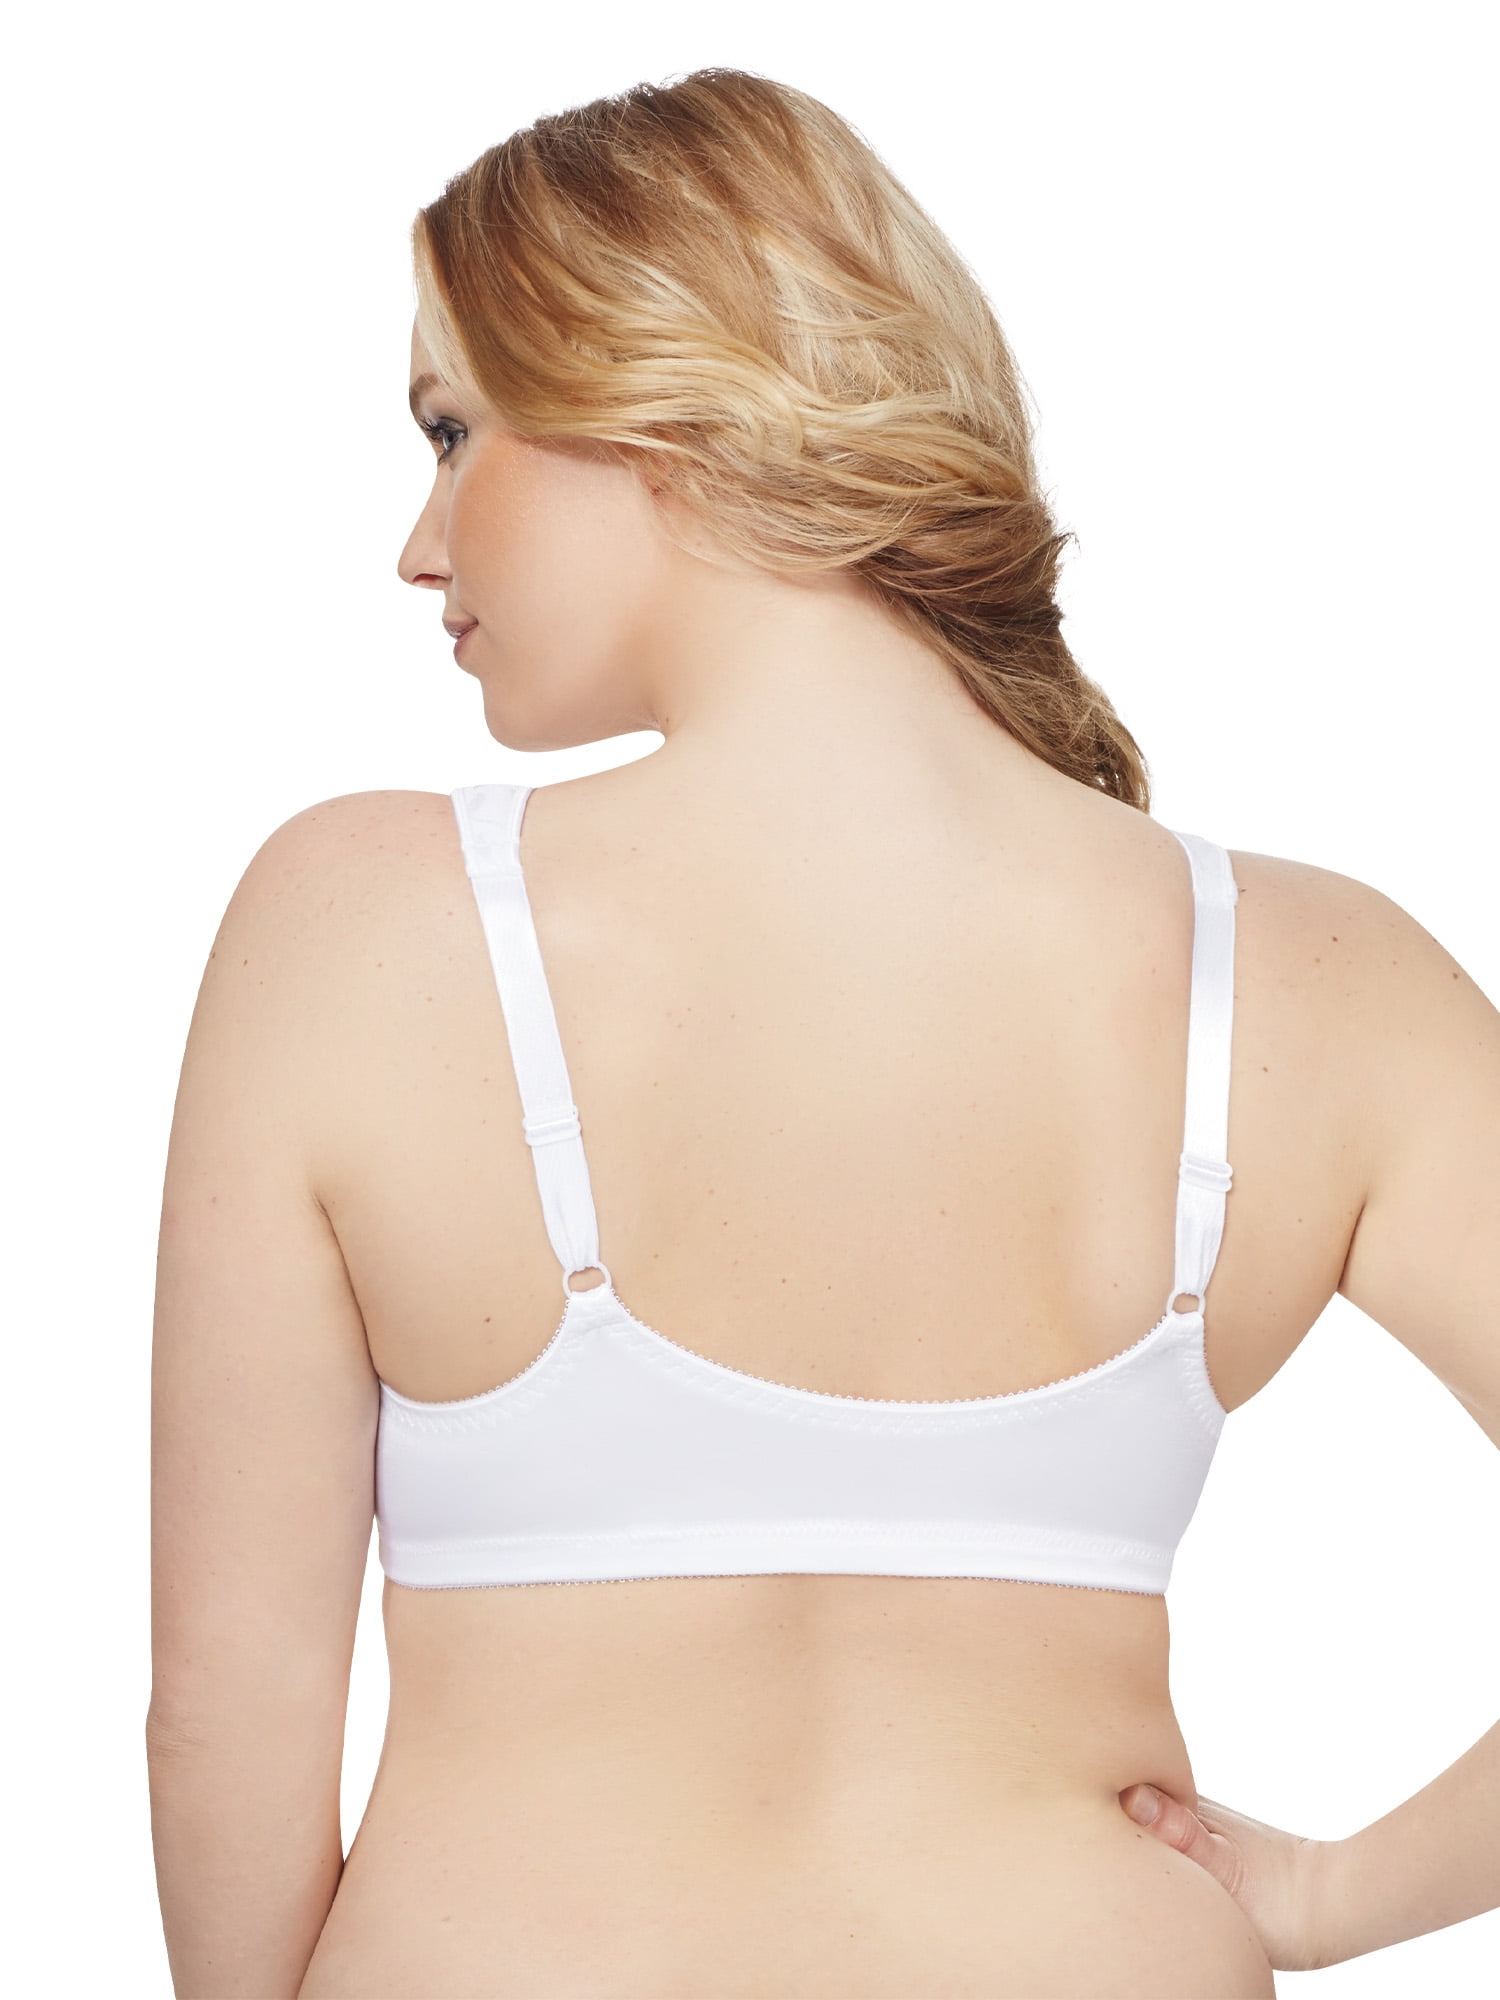 ▷ 1 Playtex Just my size 1107 Easy On Front Close Bra. Choose